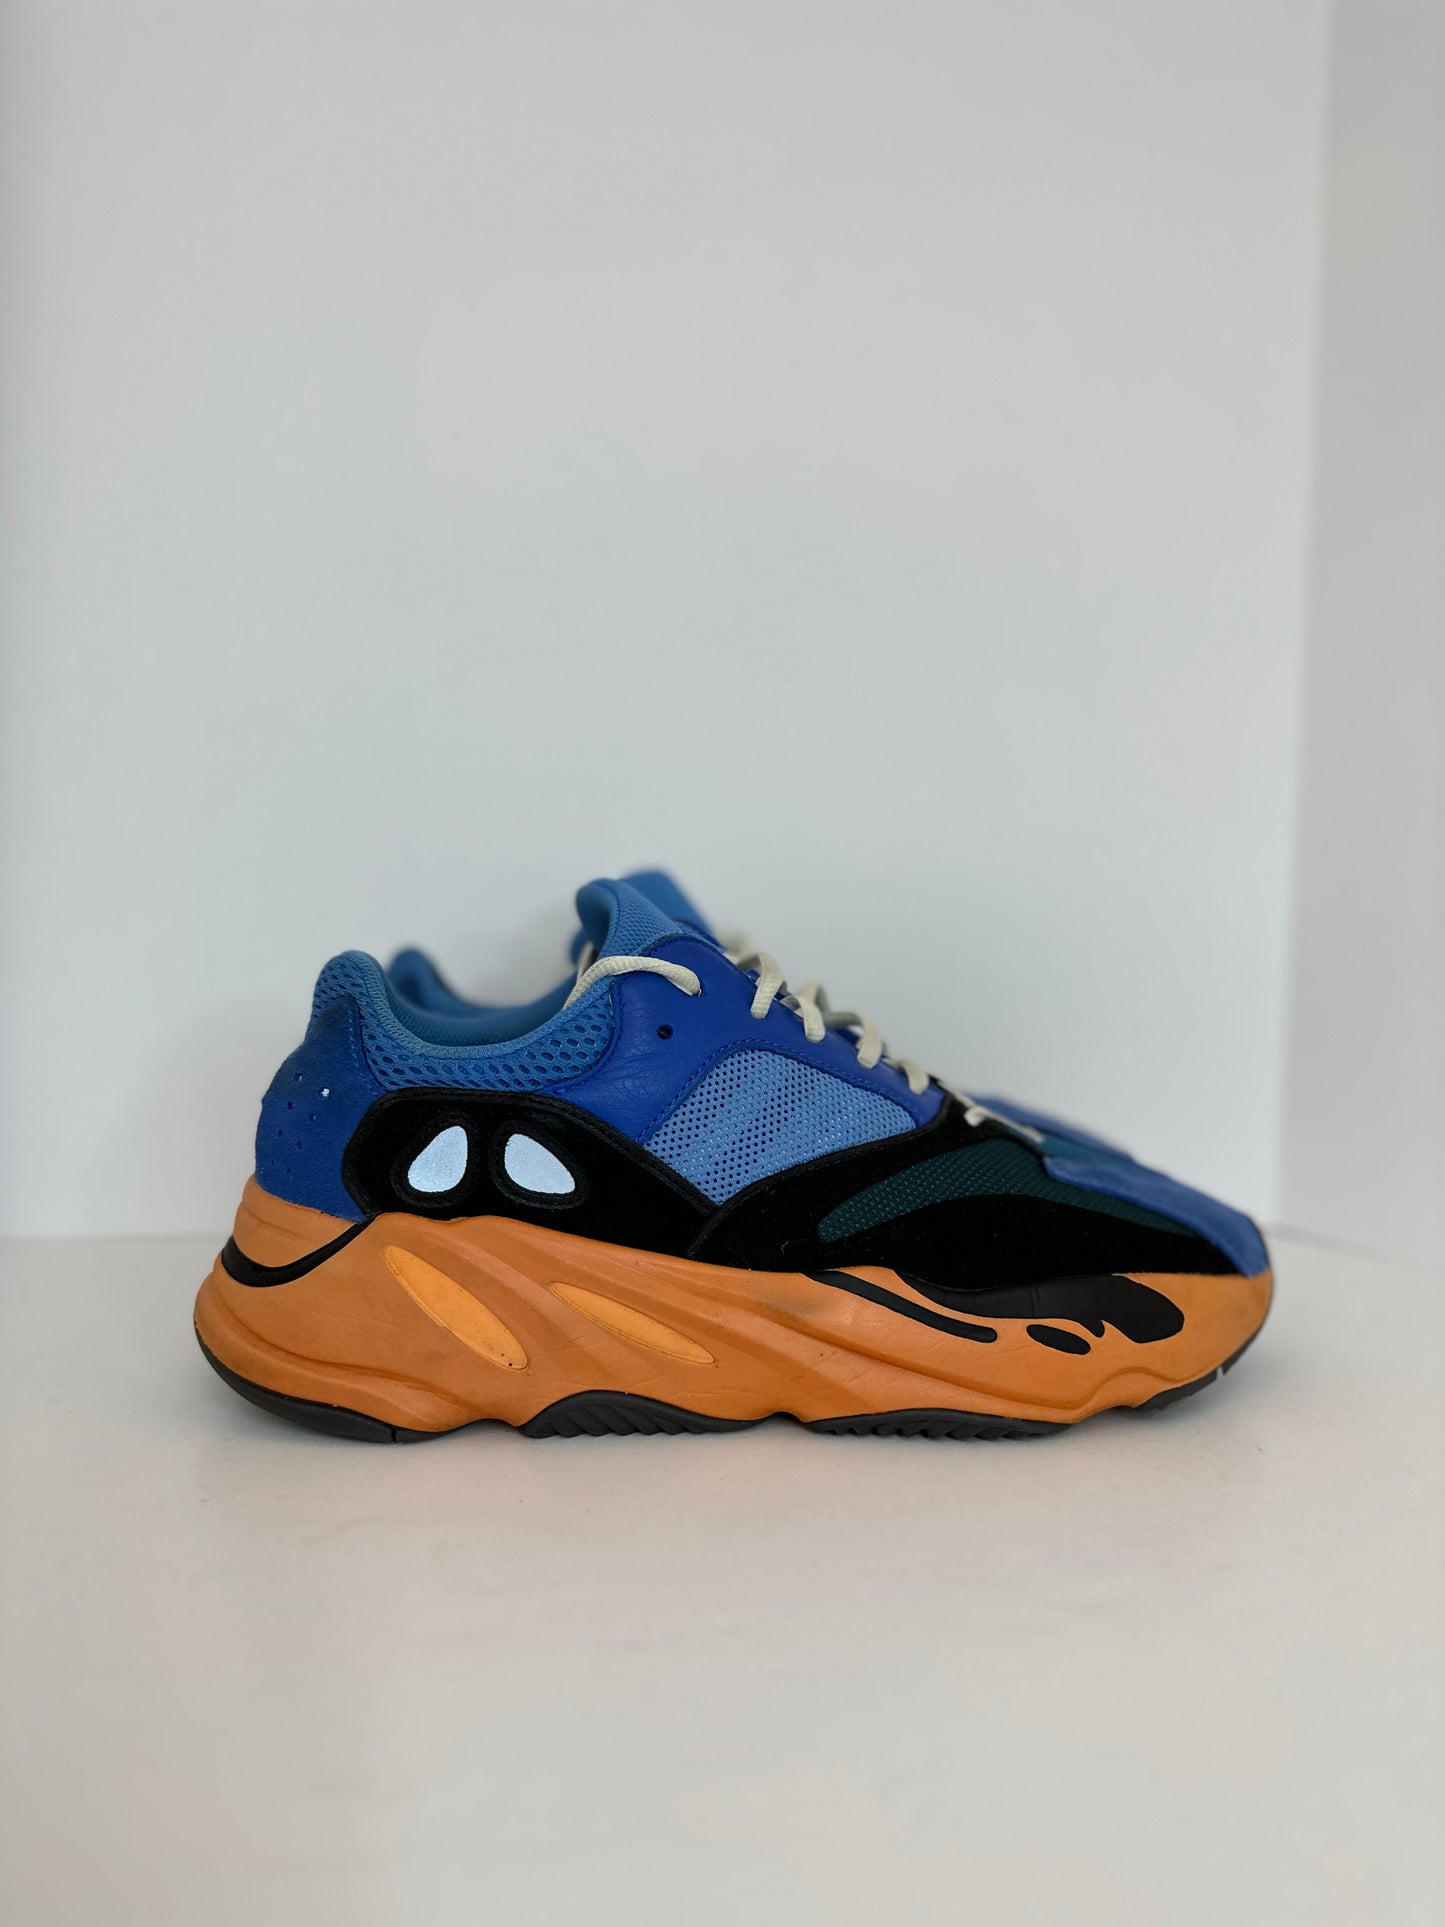 Yeezy 700 Bright Blue Size 12 (rep box) Slightly Used